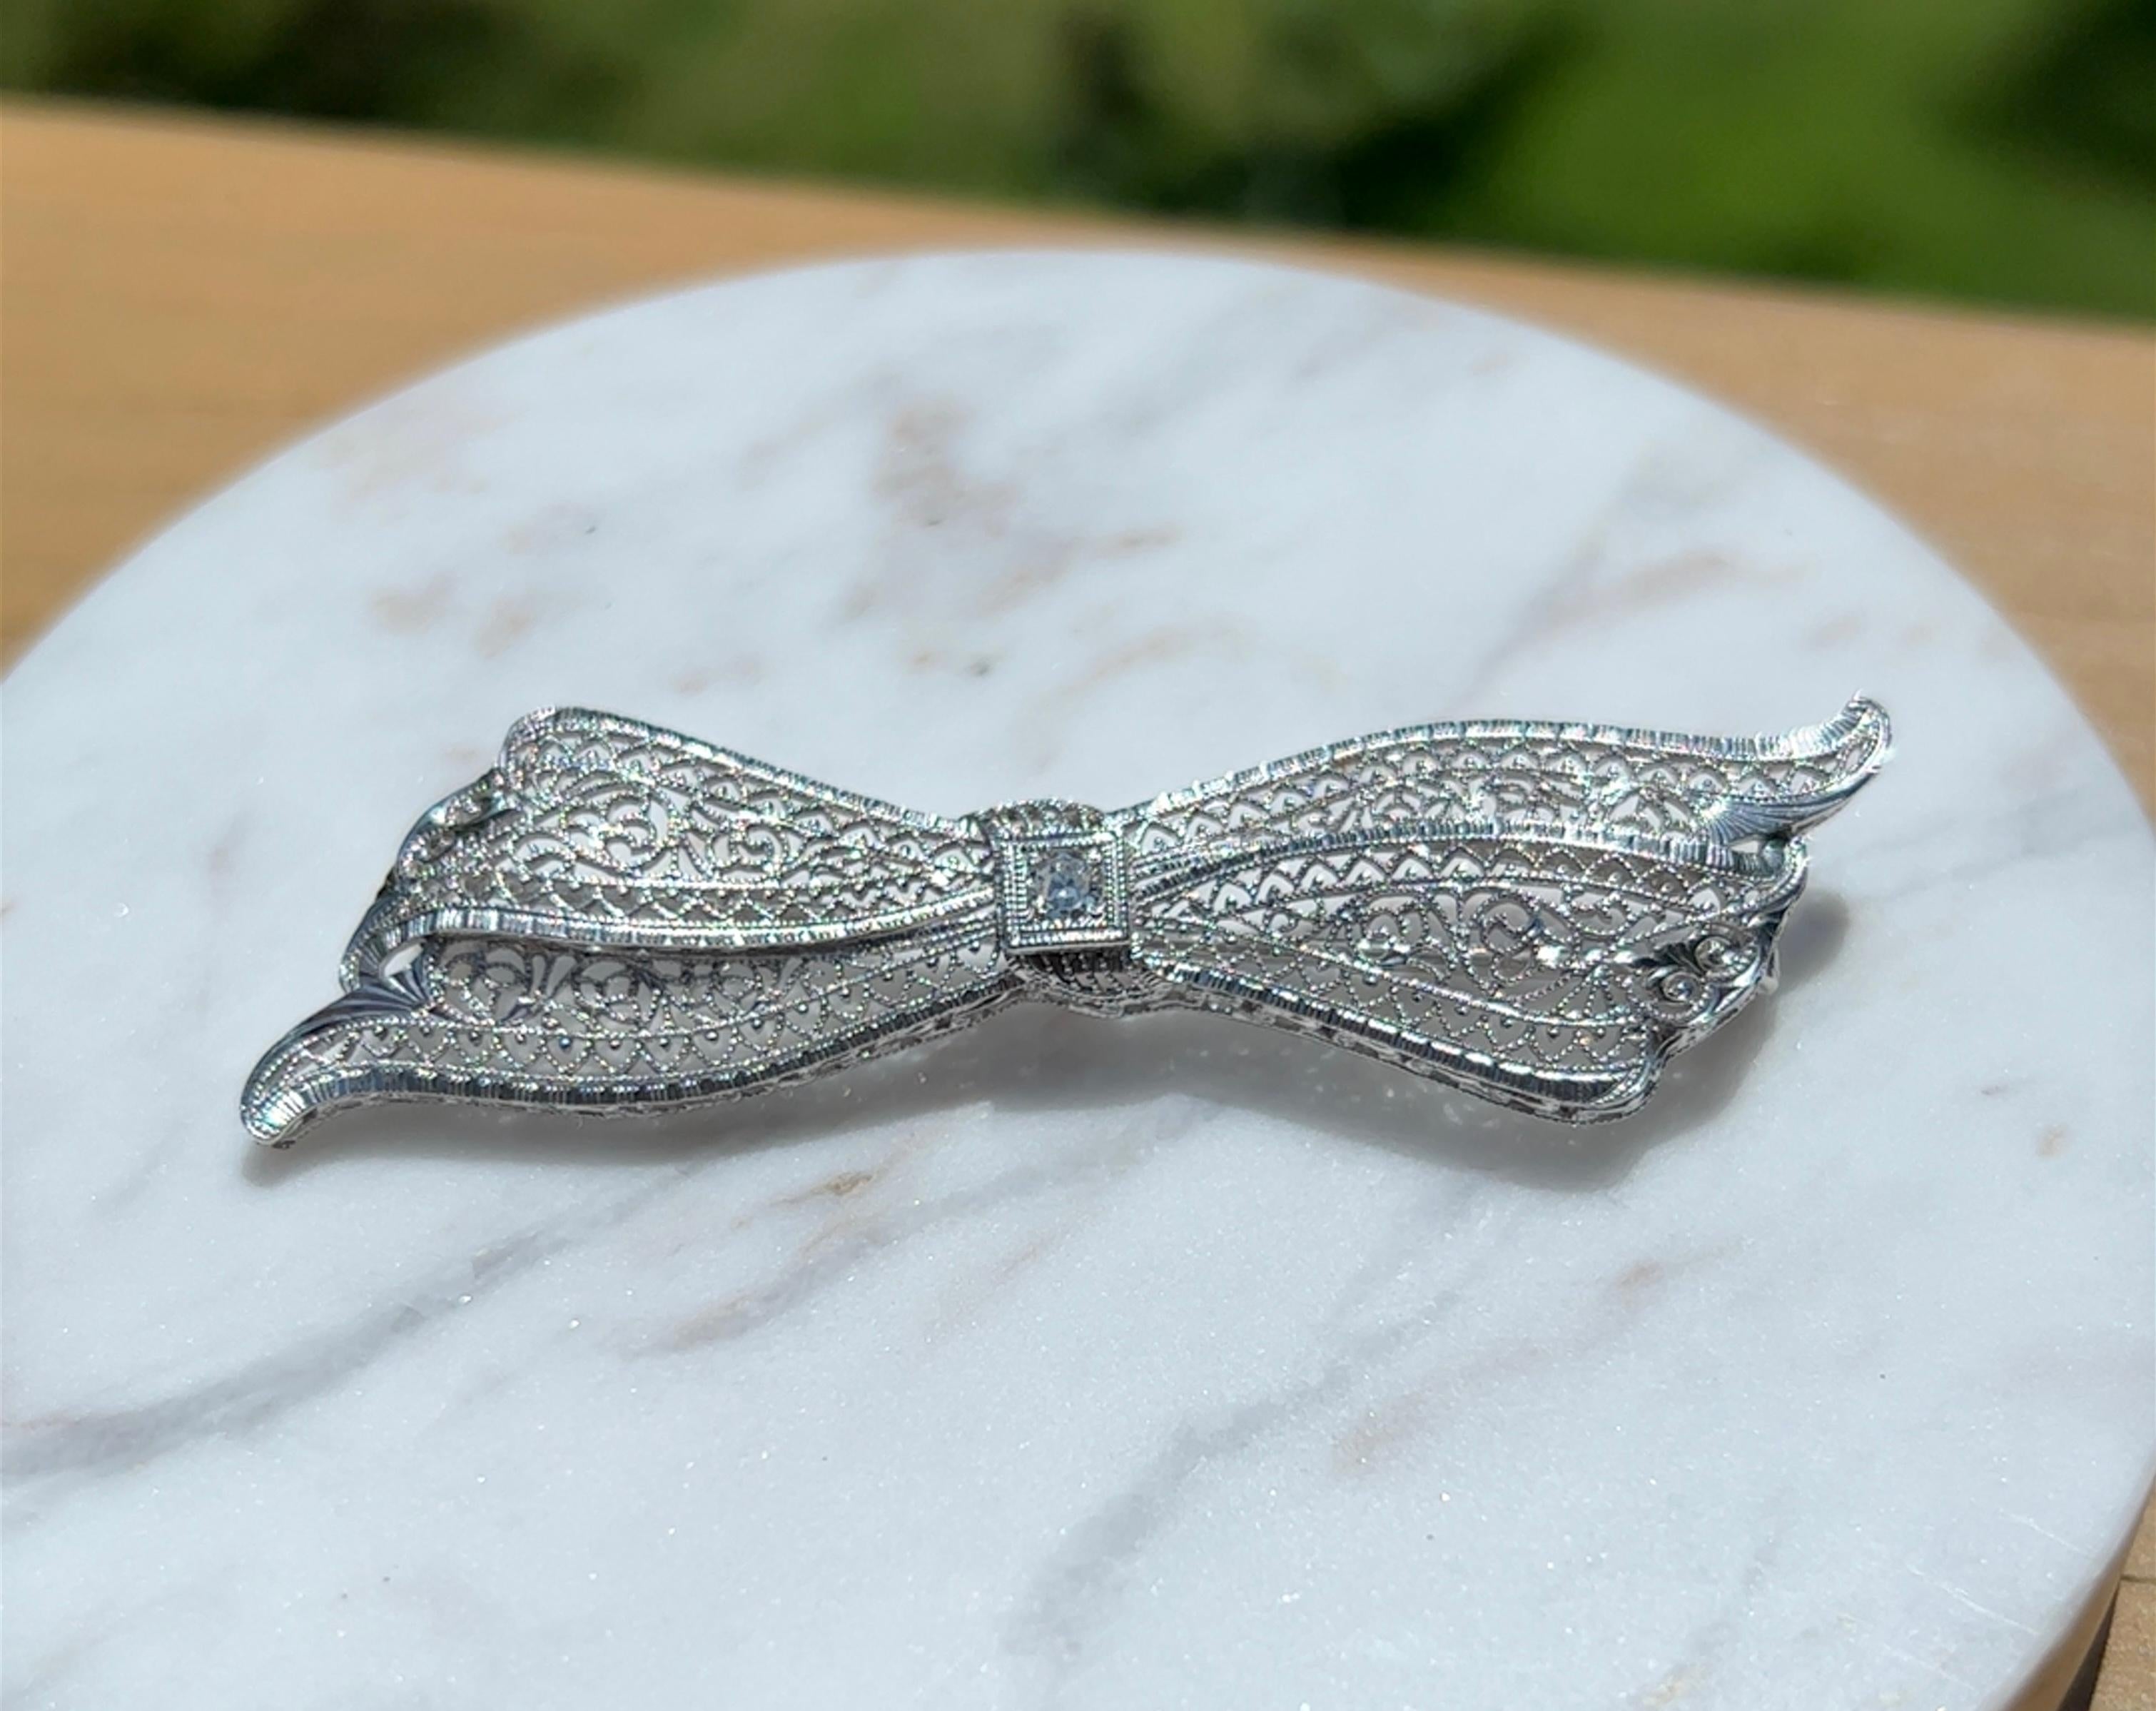 One 14 karat white gold Art Deco filigree bow design pin, set with one (1) old European cut diamond, approximately 0.07 carat with I/J SI1 clarity.  The pin measures 2.5 inches long and 0.25 of an inch wide. The pin weighs 5.4 grams and is complete